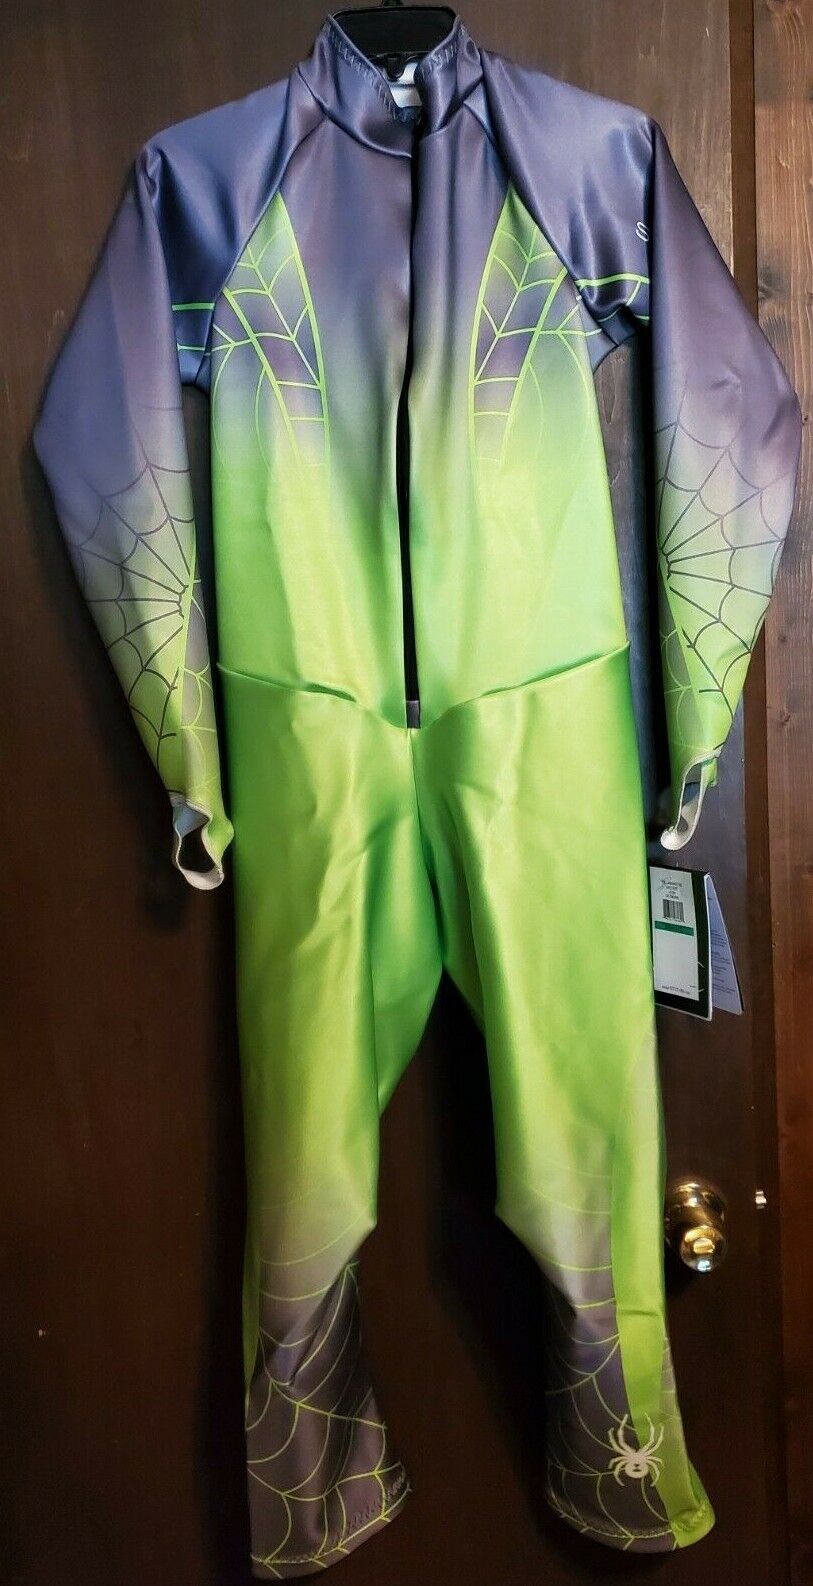 Spyder Mens Performance DH Race Suit 40% OFF Cheap Sale Green Grey USA NWT Large Sale price Sz